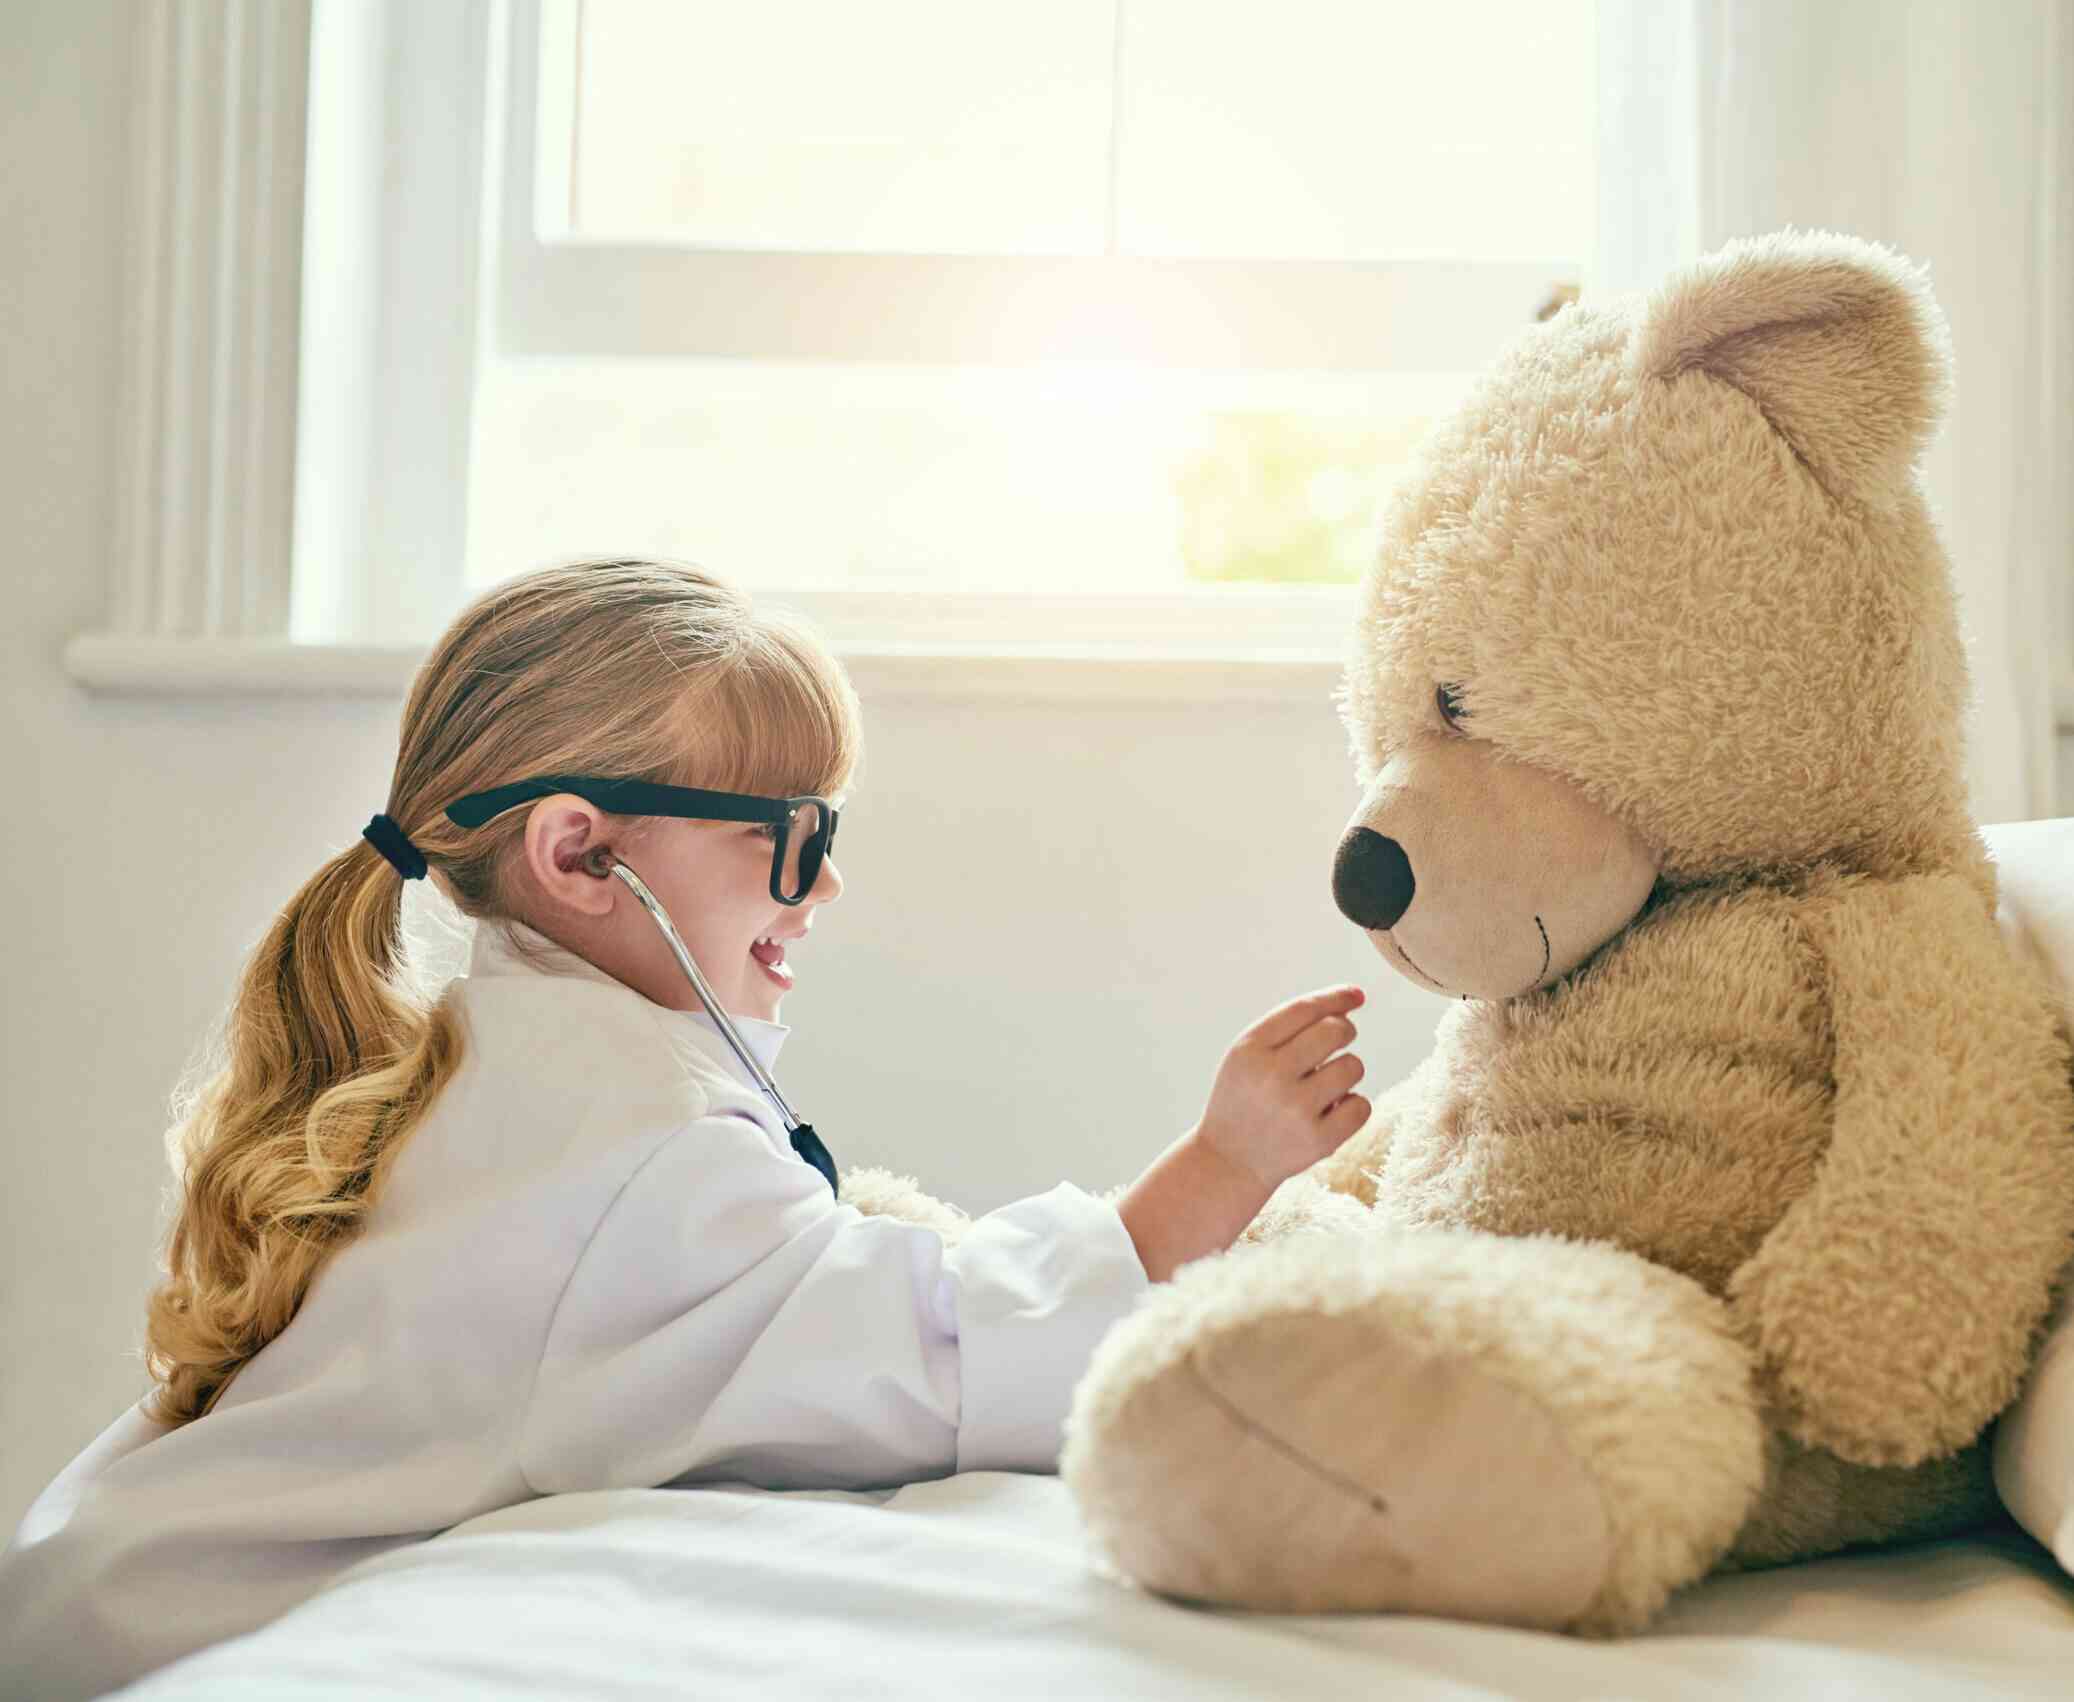 A child playing doctor with a teddy bear